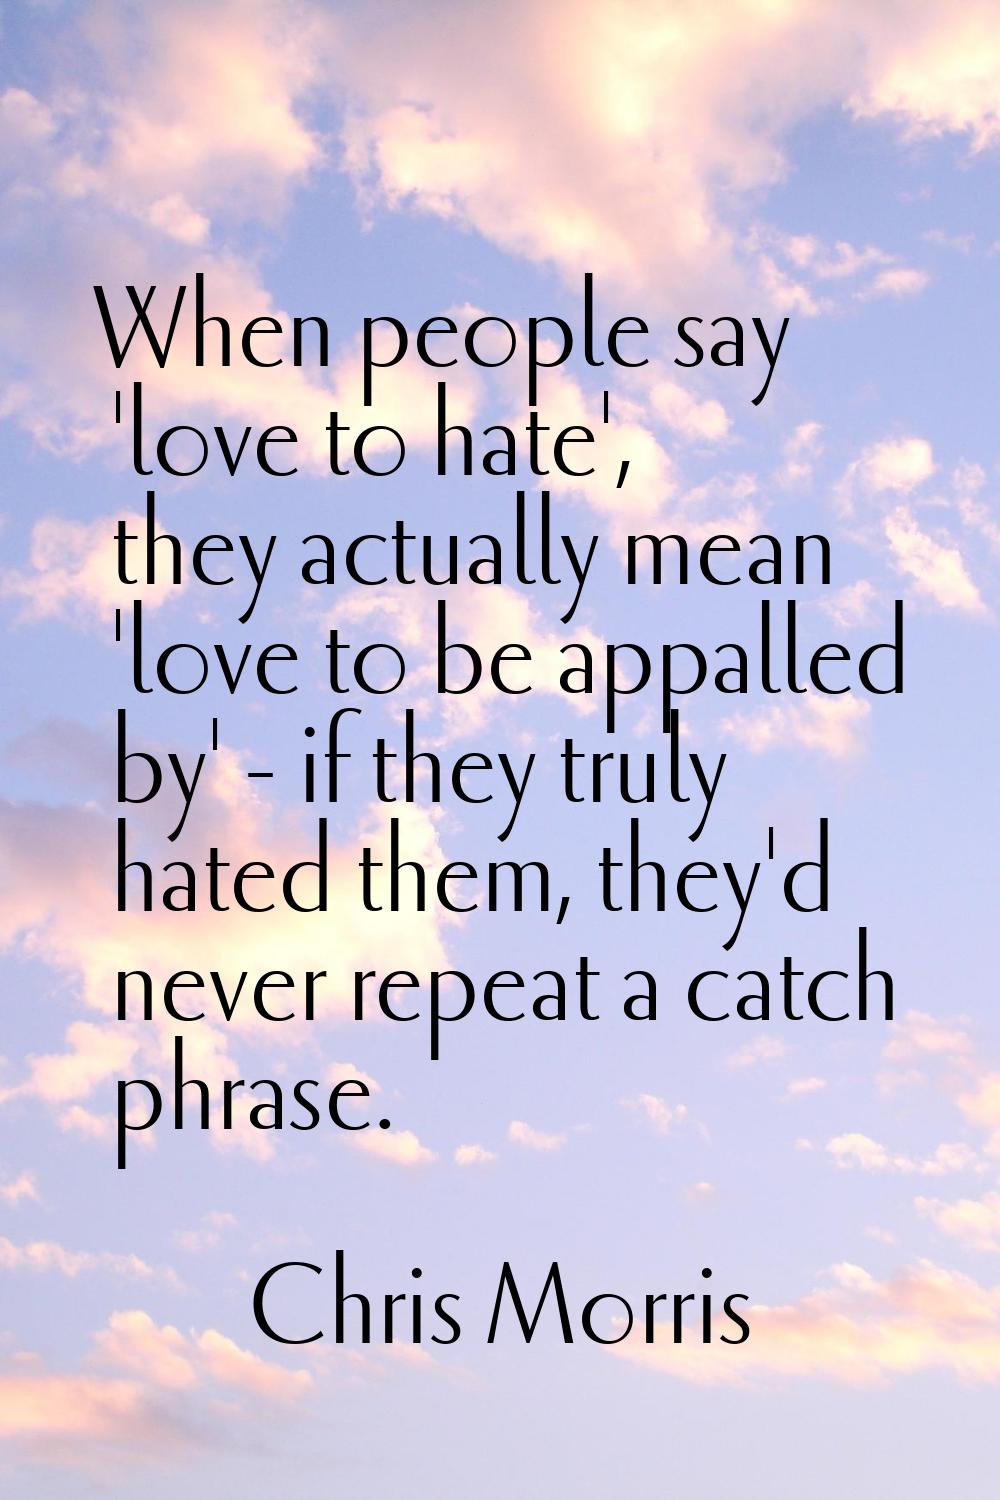 When people say 'love to hate', they actually mean 'love to be appalled by' - if they truly hated t